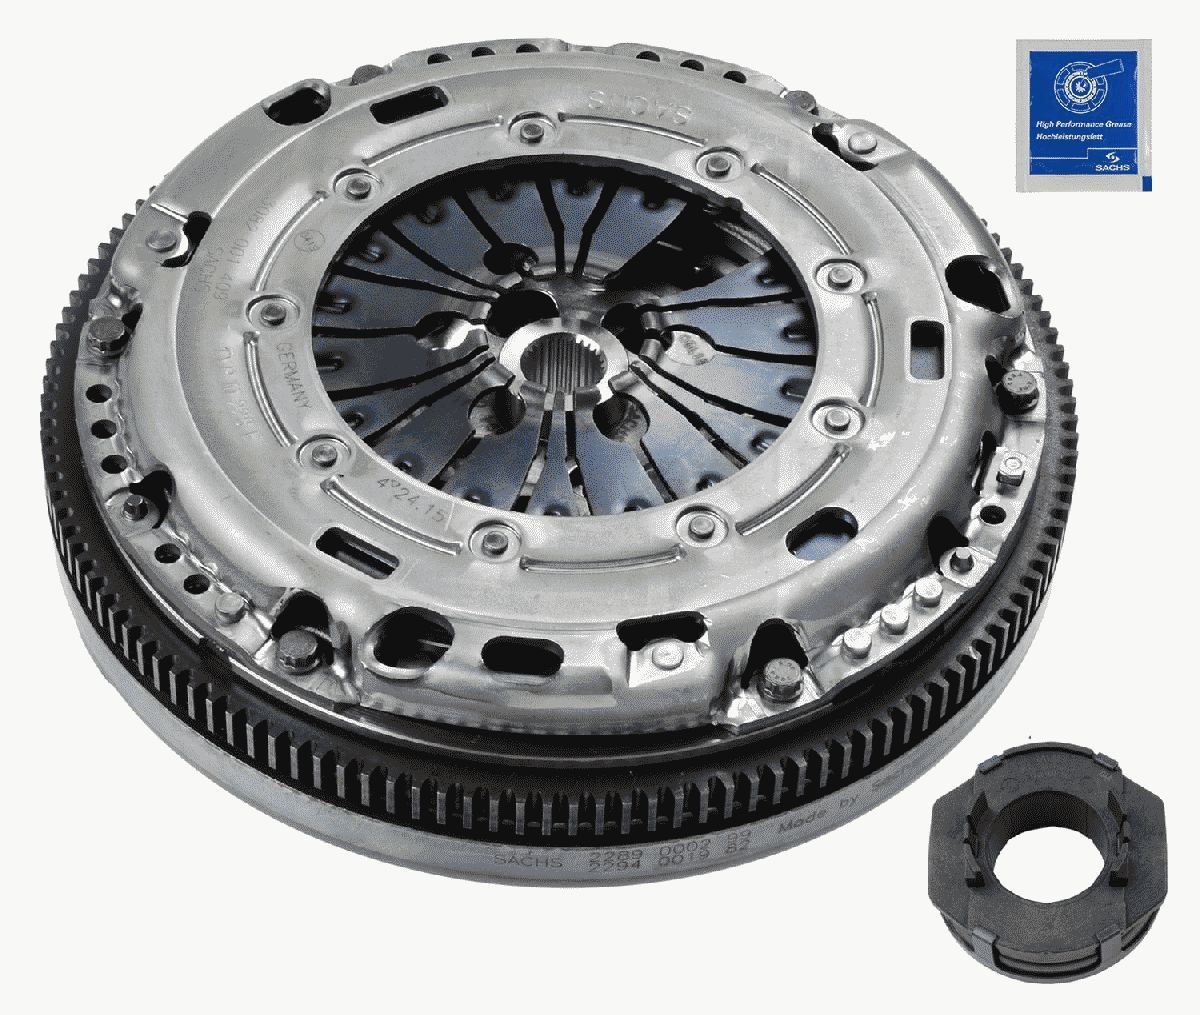 SACHS 2290602004 Clutch replacement kit with clutch pressure plate, with dual-mass flywheel, with flywheel screws, with pressure plate screws, with clutch disc, with clutch release bearing, 228mm